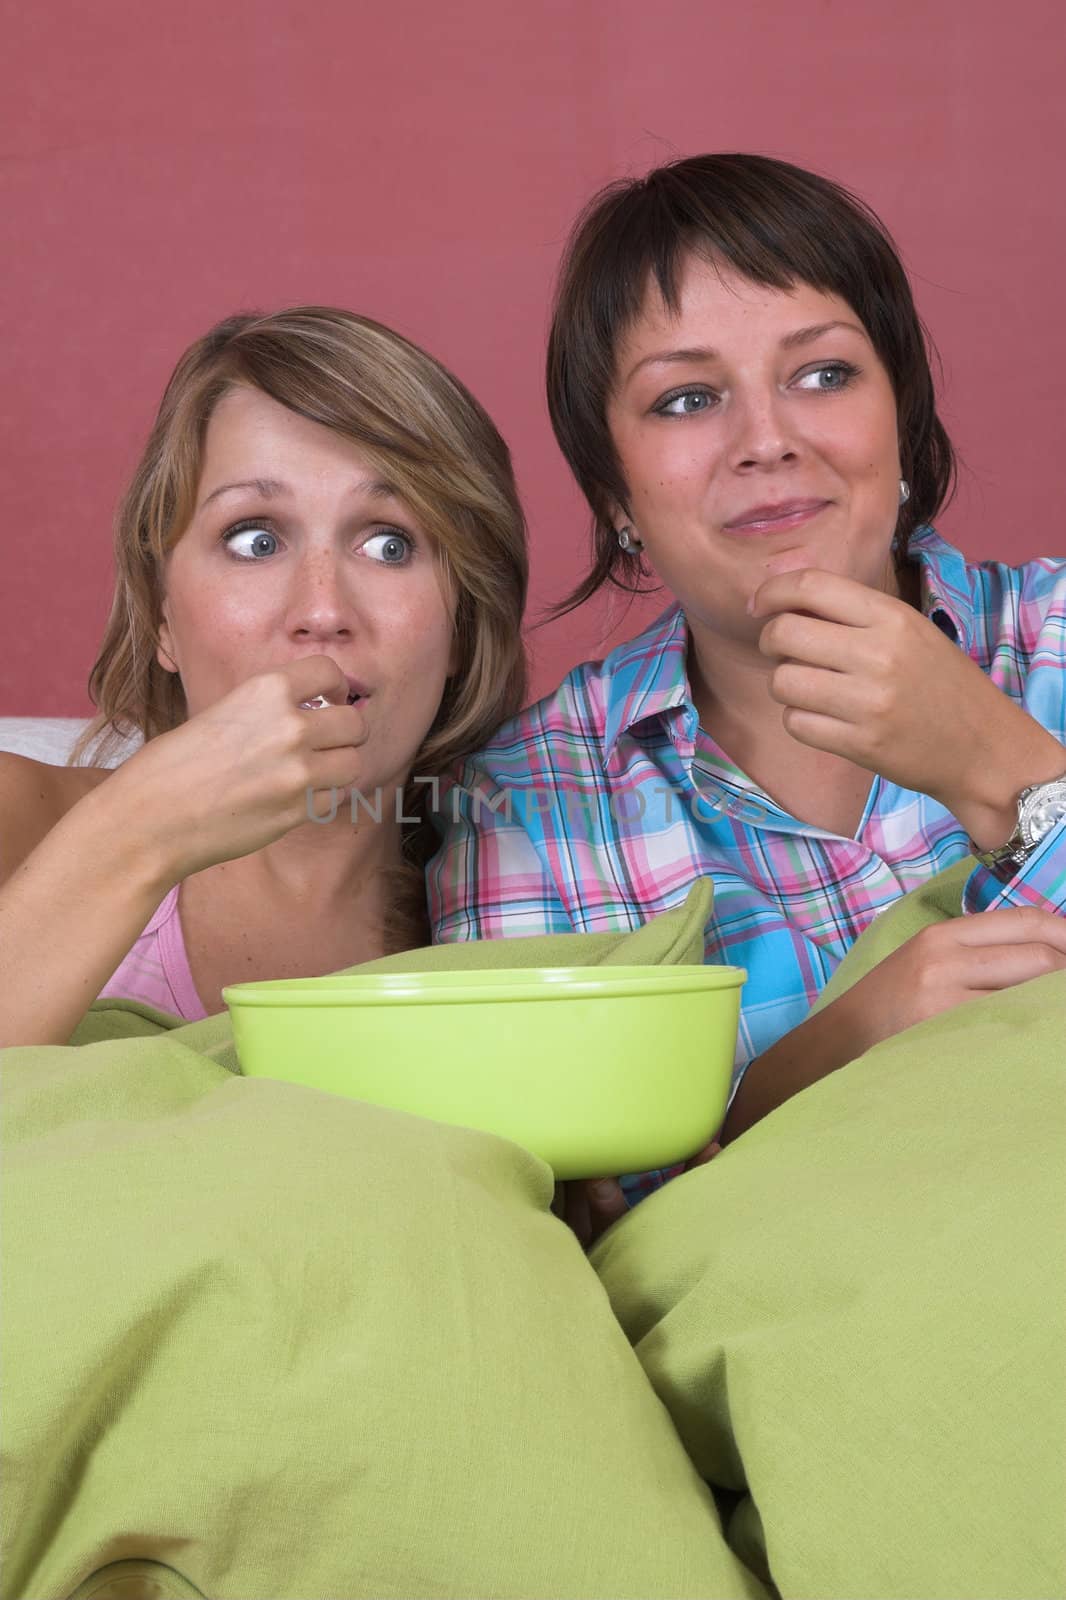 Two girls on the couch together watching a movie while eating popcorn and looking surprised